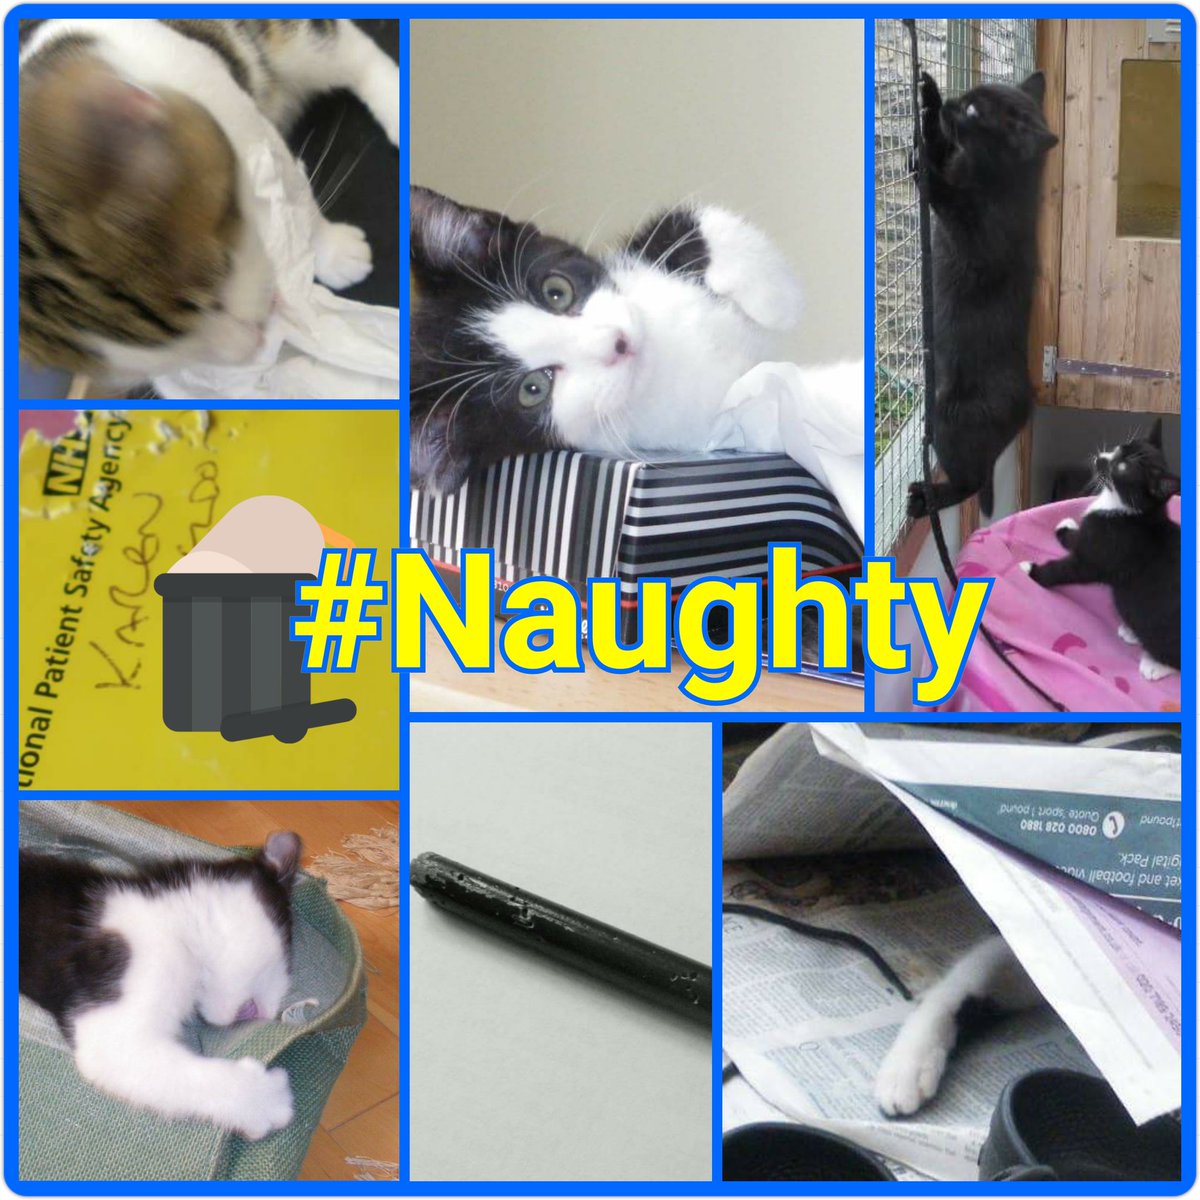 #kittens are #cute but #trouble ! #giveanadultachance adopt a #maturemoggy #AdoptDontShop #Sleaford #cats #adult
m.facebook.com/story.php?stor…